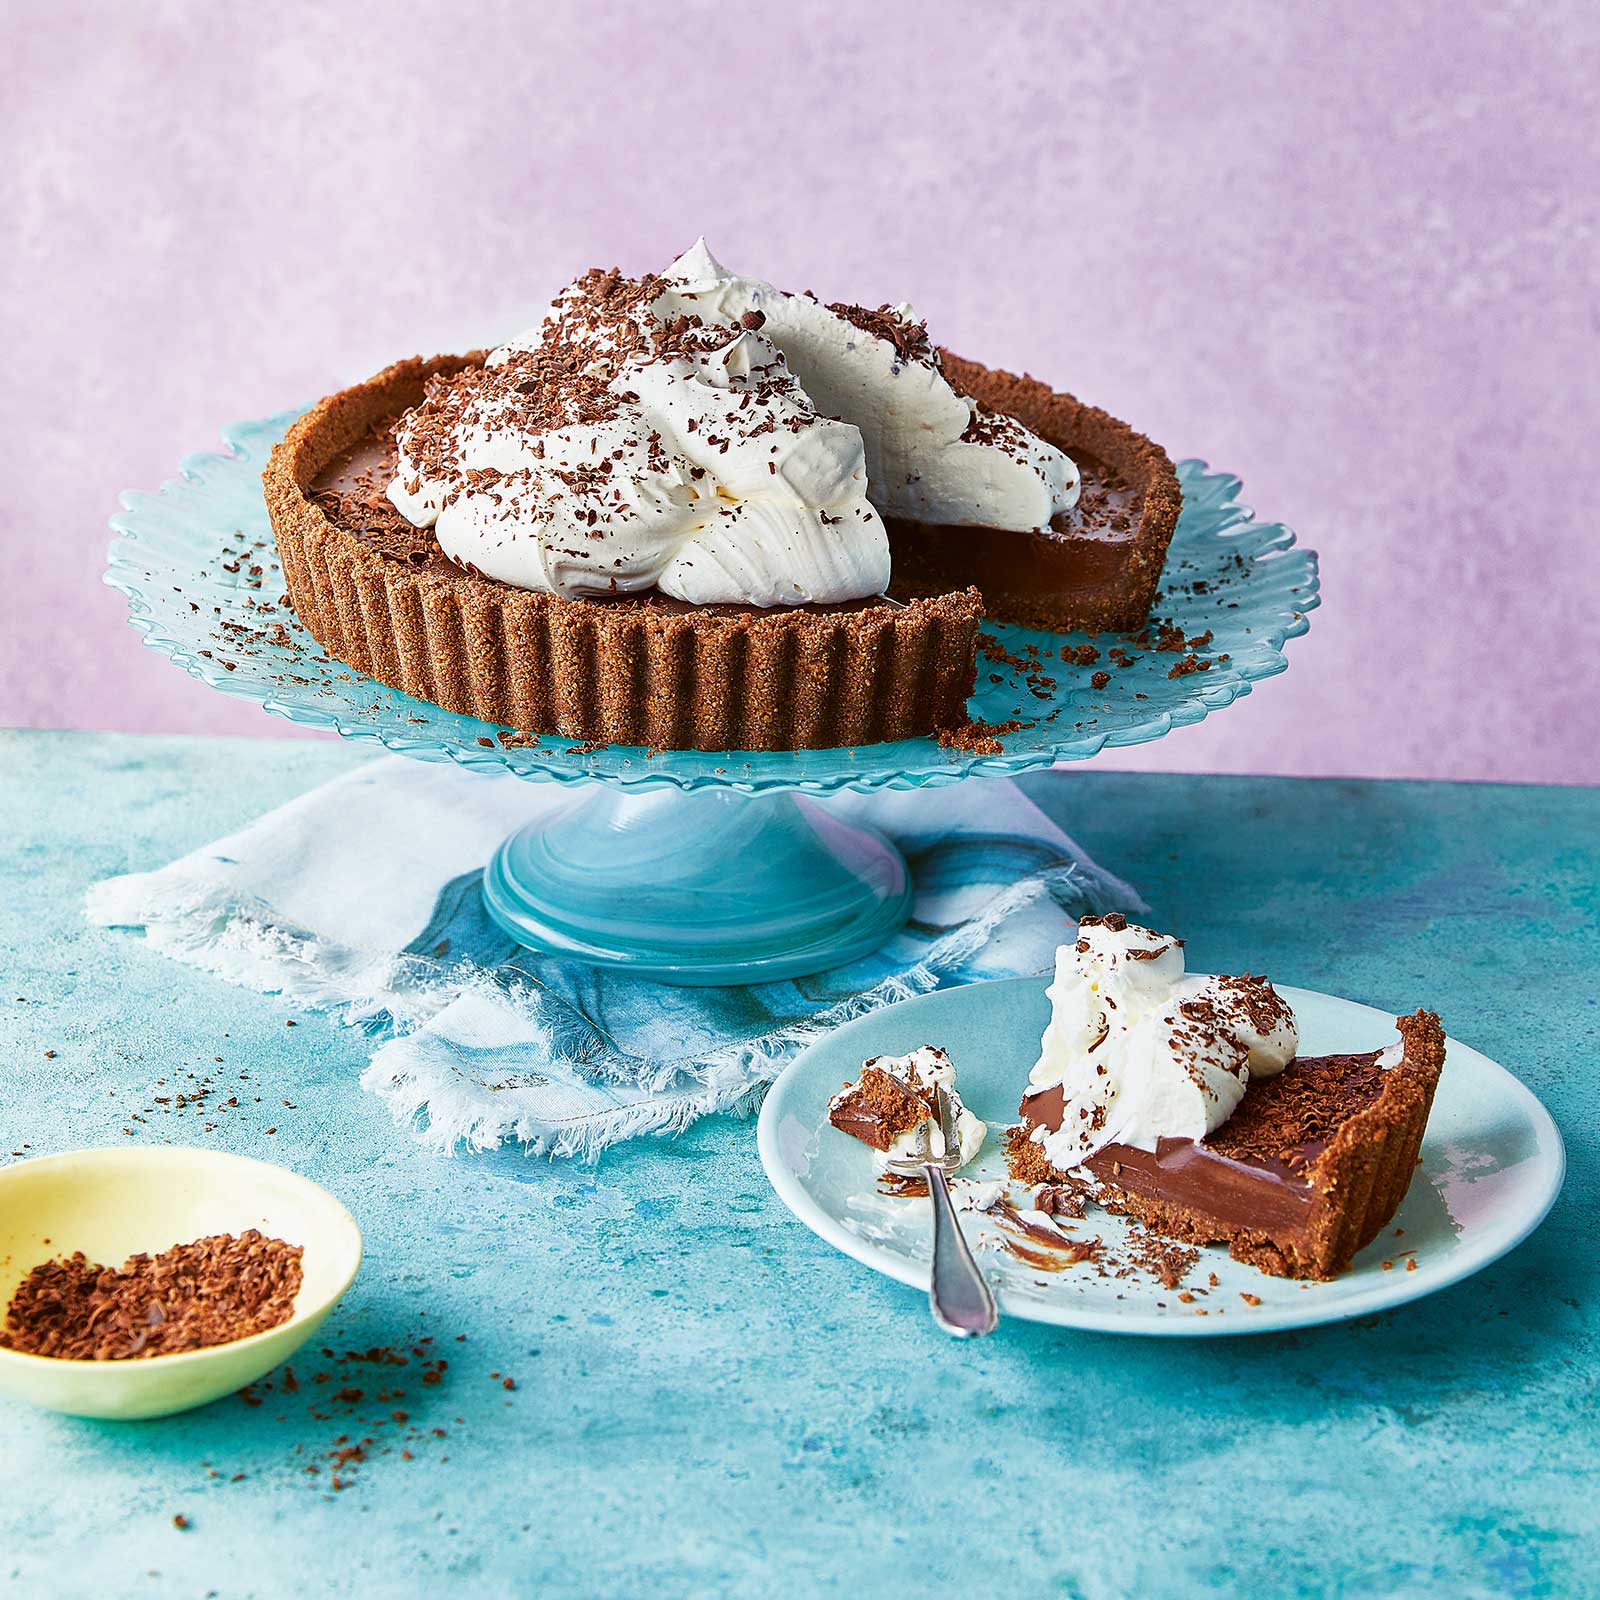 Gluten-Free No Bake Chocolate Cream Pie sits on a blue cake stand. It's topped with cream and crated chocolate. A slice has been remove and sits on a plate in front.